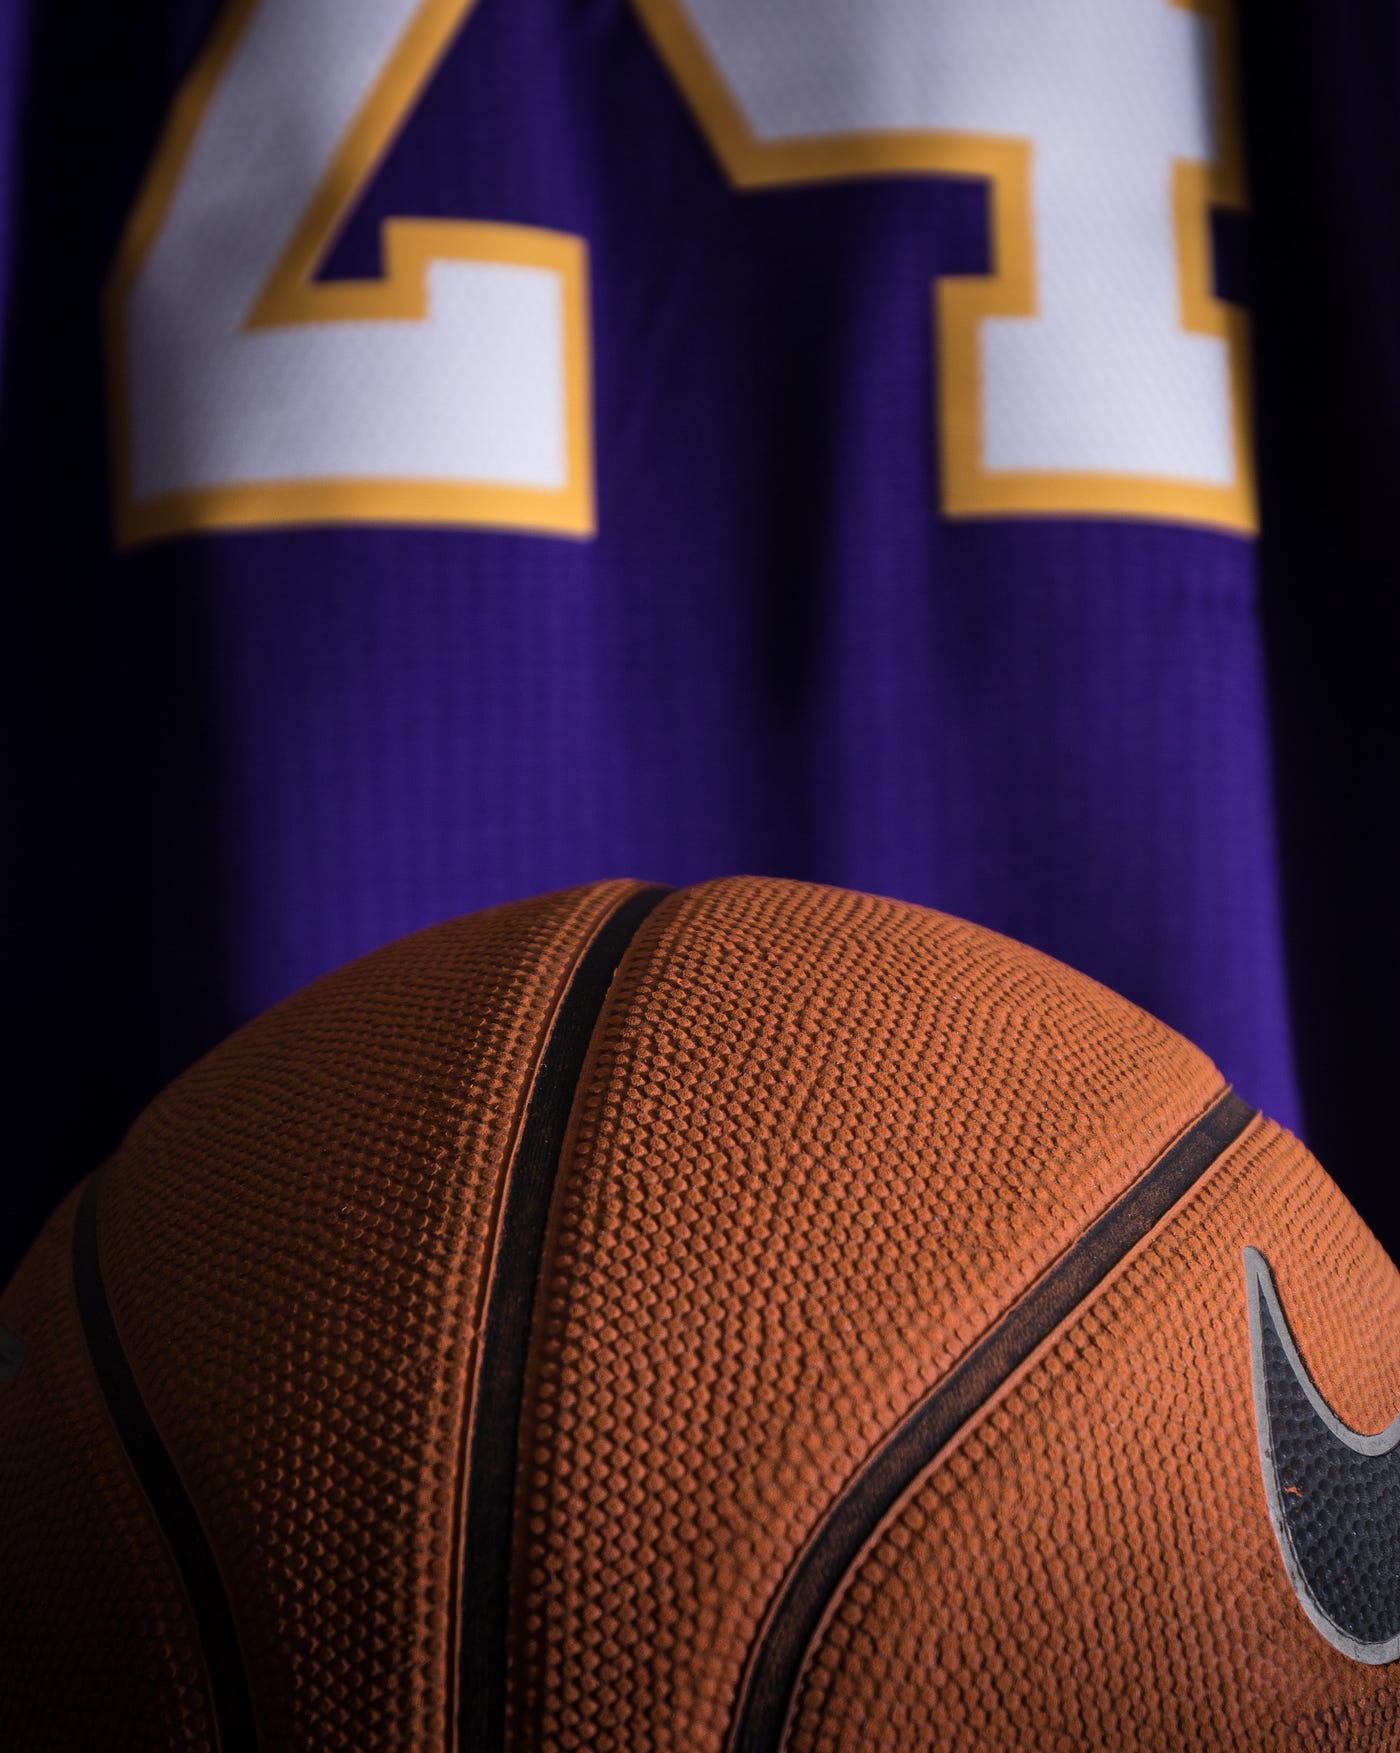 First look at Kobe Bryant in uniform for the '15-16 Season